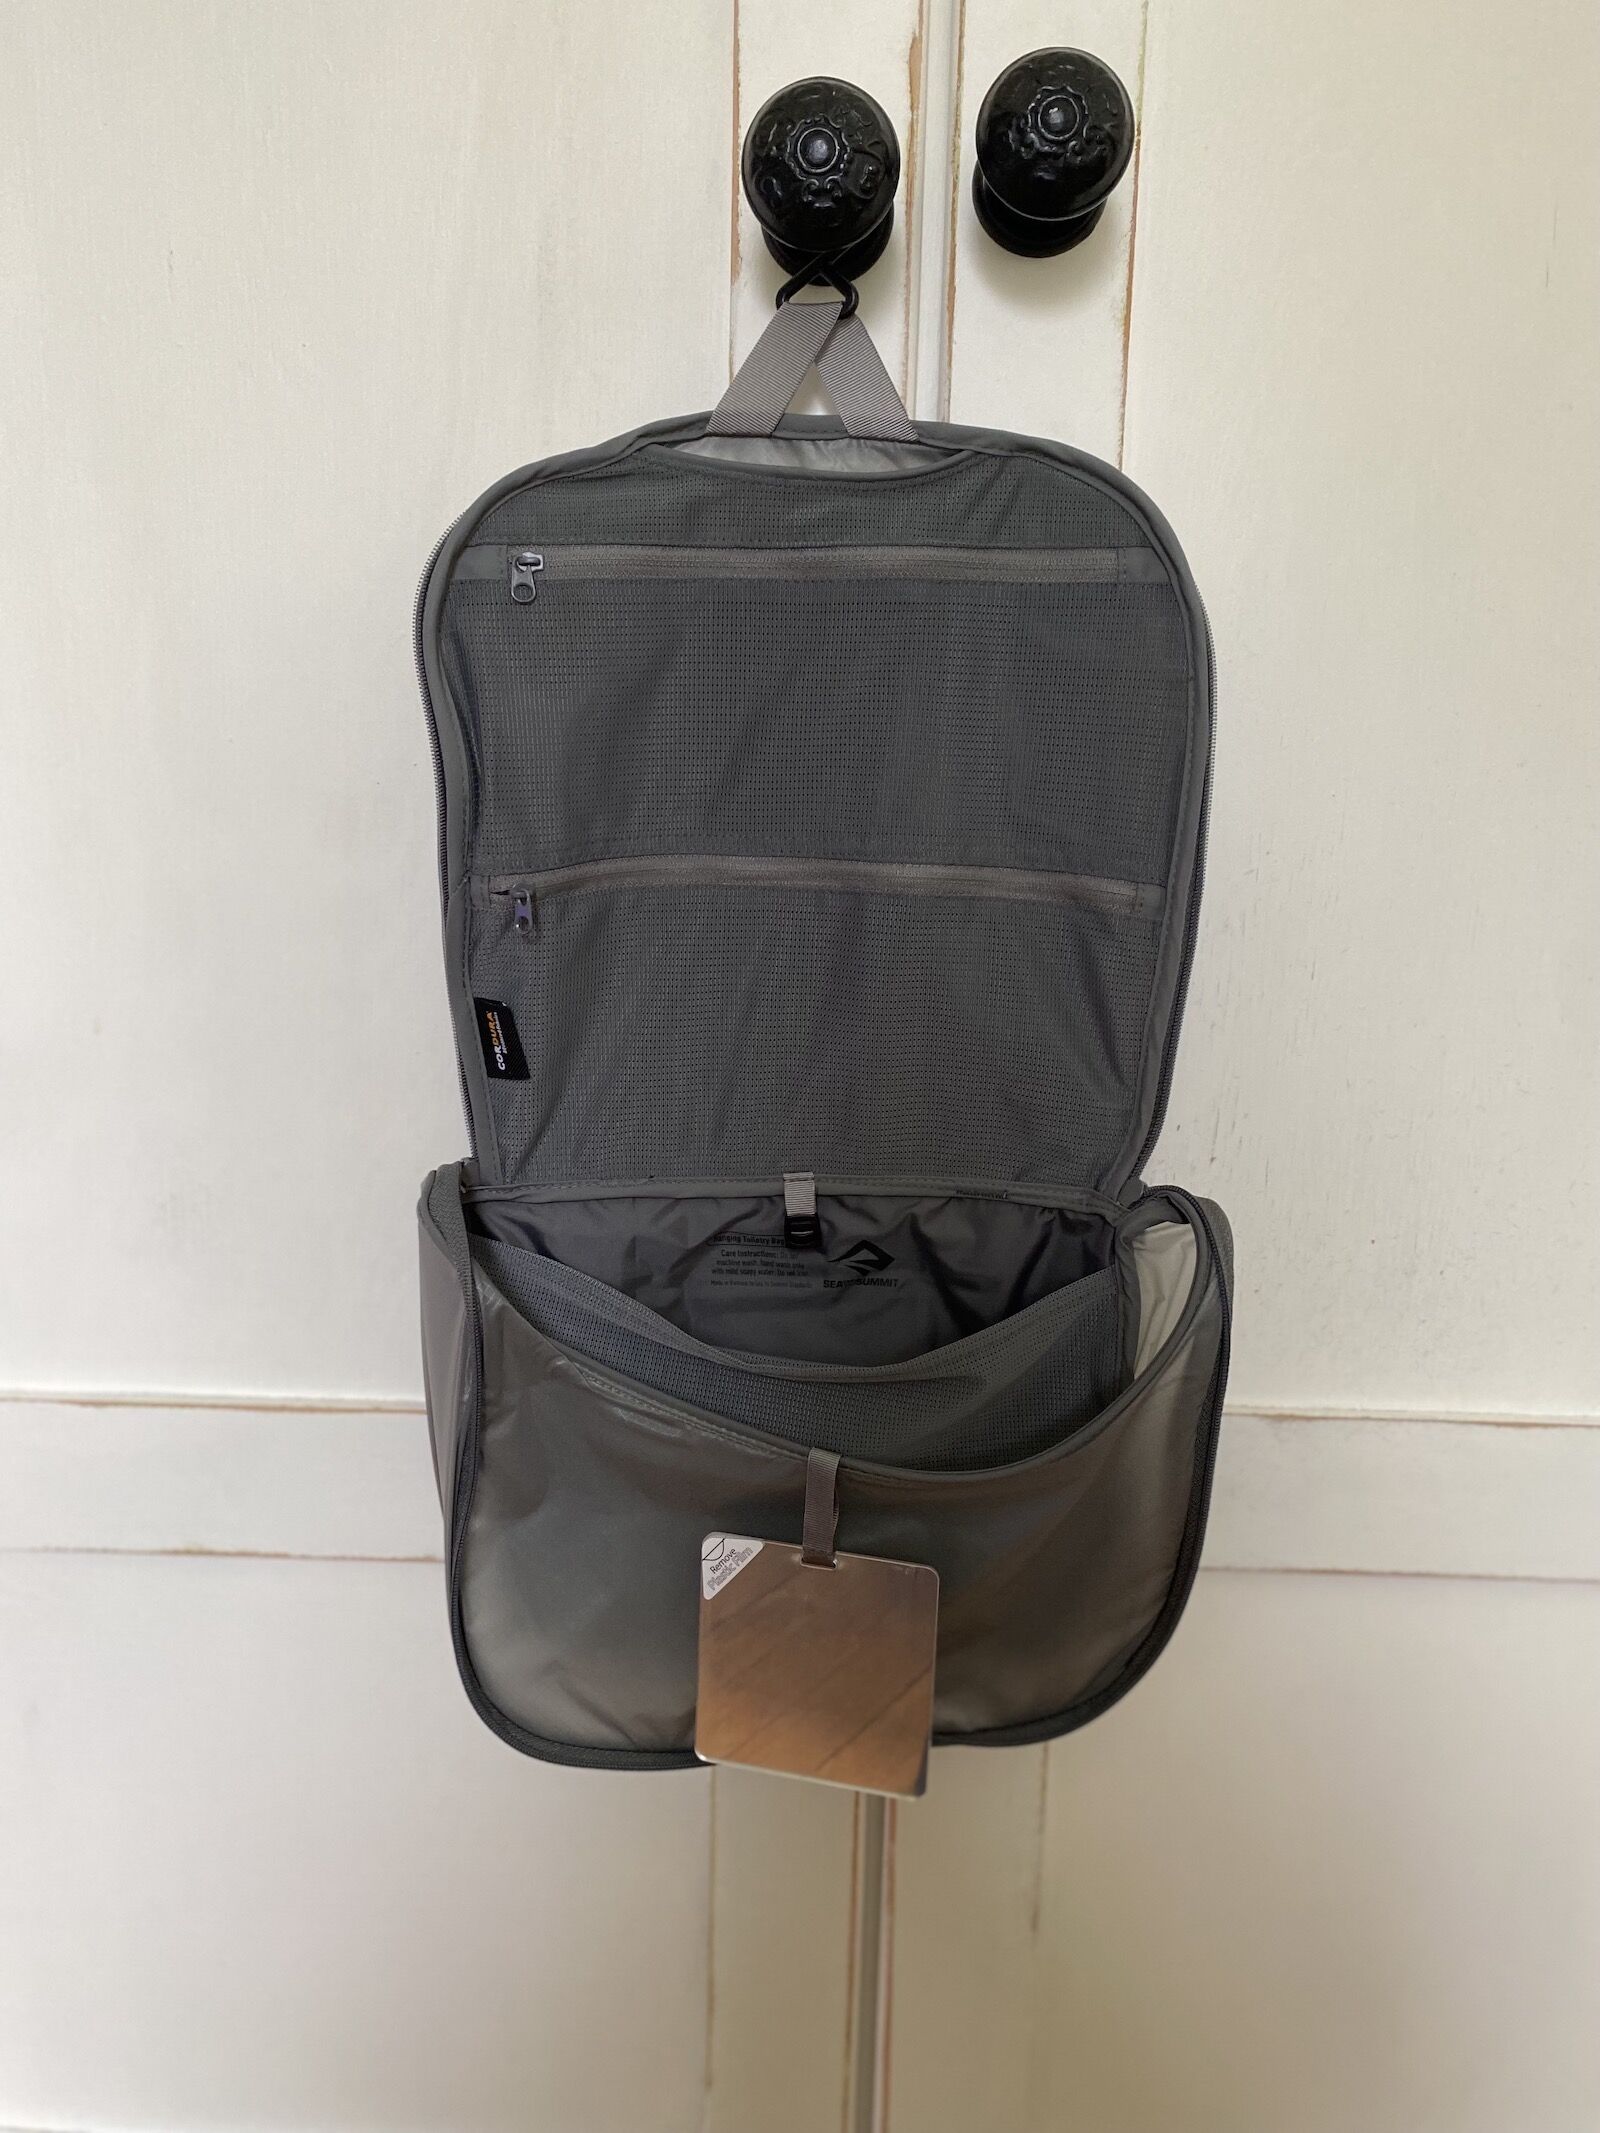 Sea to Summit Toiletry Bag: Review of the Large and Small Sizes